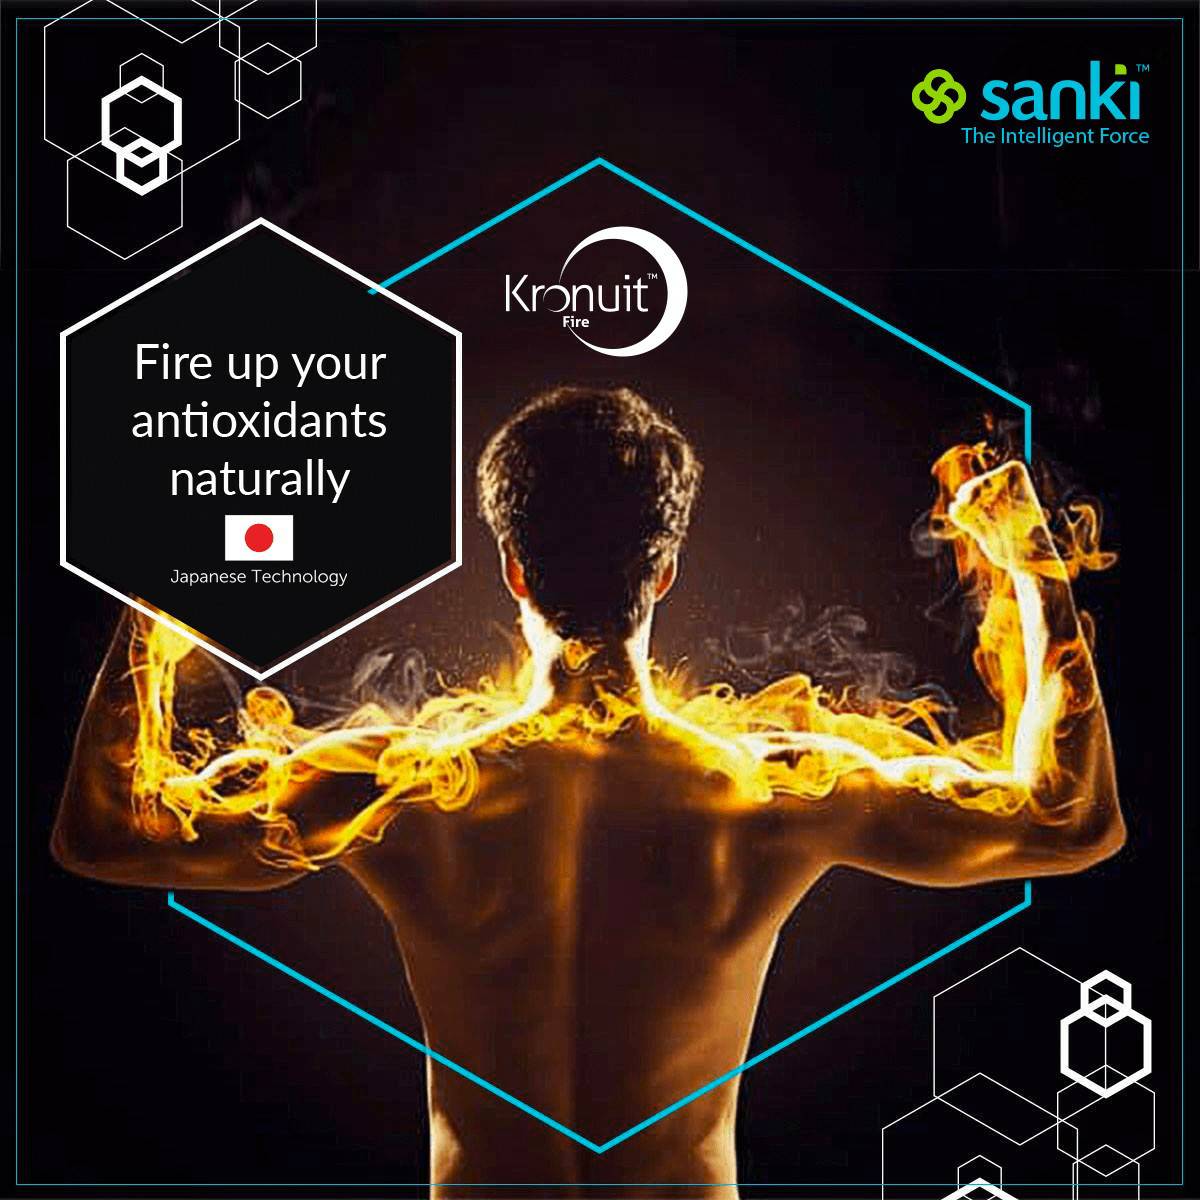 Kronuit Fire helps your body produce antioxidants, while also generating warmth in your body to get rid of fatty tissue. #Sanki #Kronuit #SankiUSA #SankiFit #ILiveMyDreams #HealthIsWealth #IntelligentForce #ThePerfectPlan